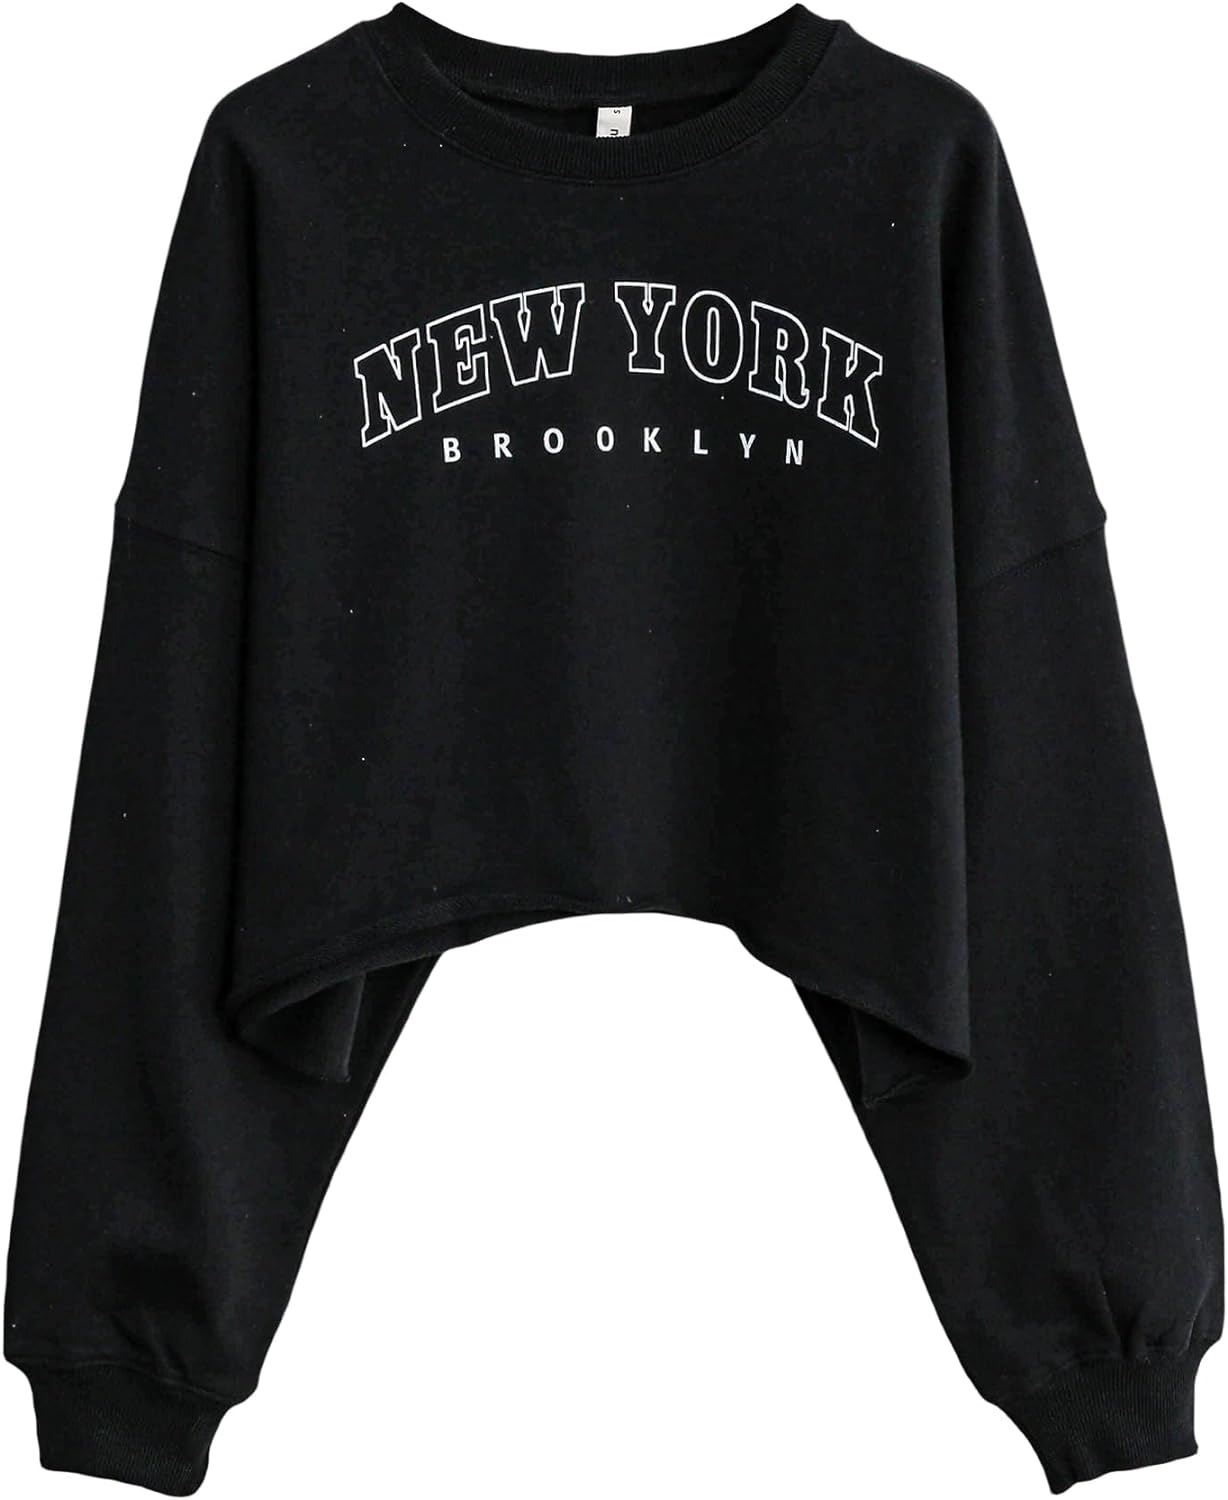 NTG Fad Ny-black / X-Small Cropped Hoodie Pullover Crewneck Crop Tops Oversize Fit